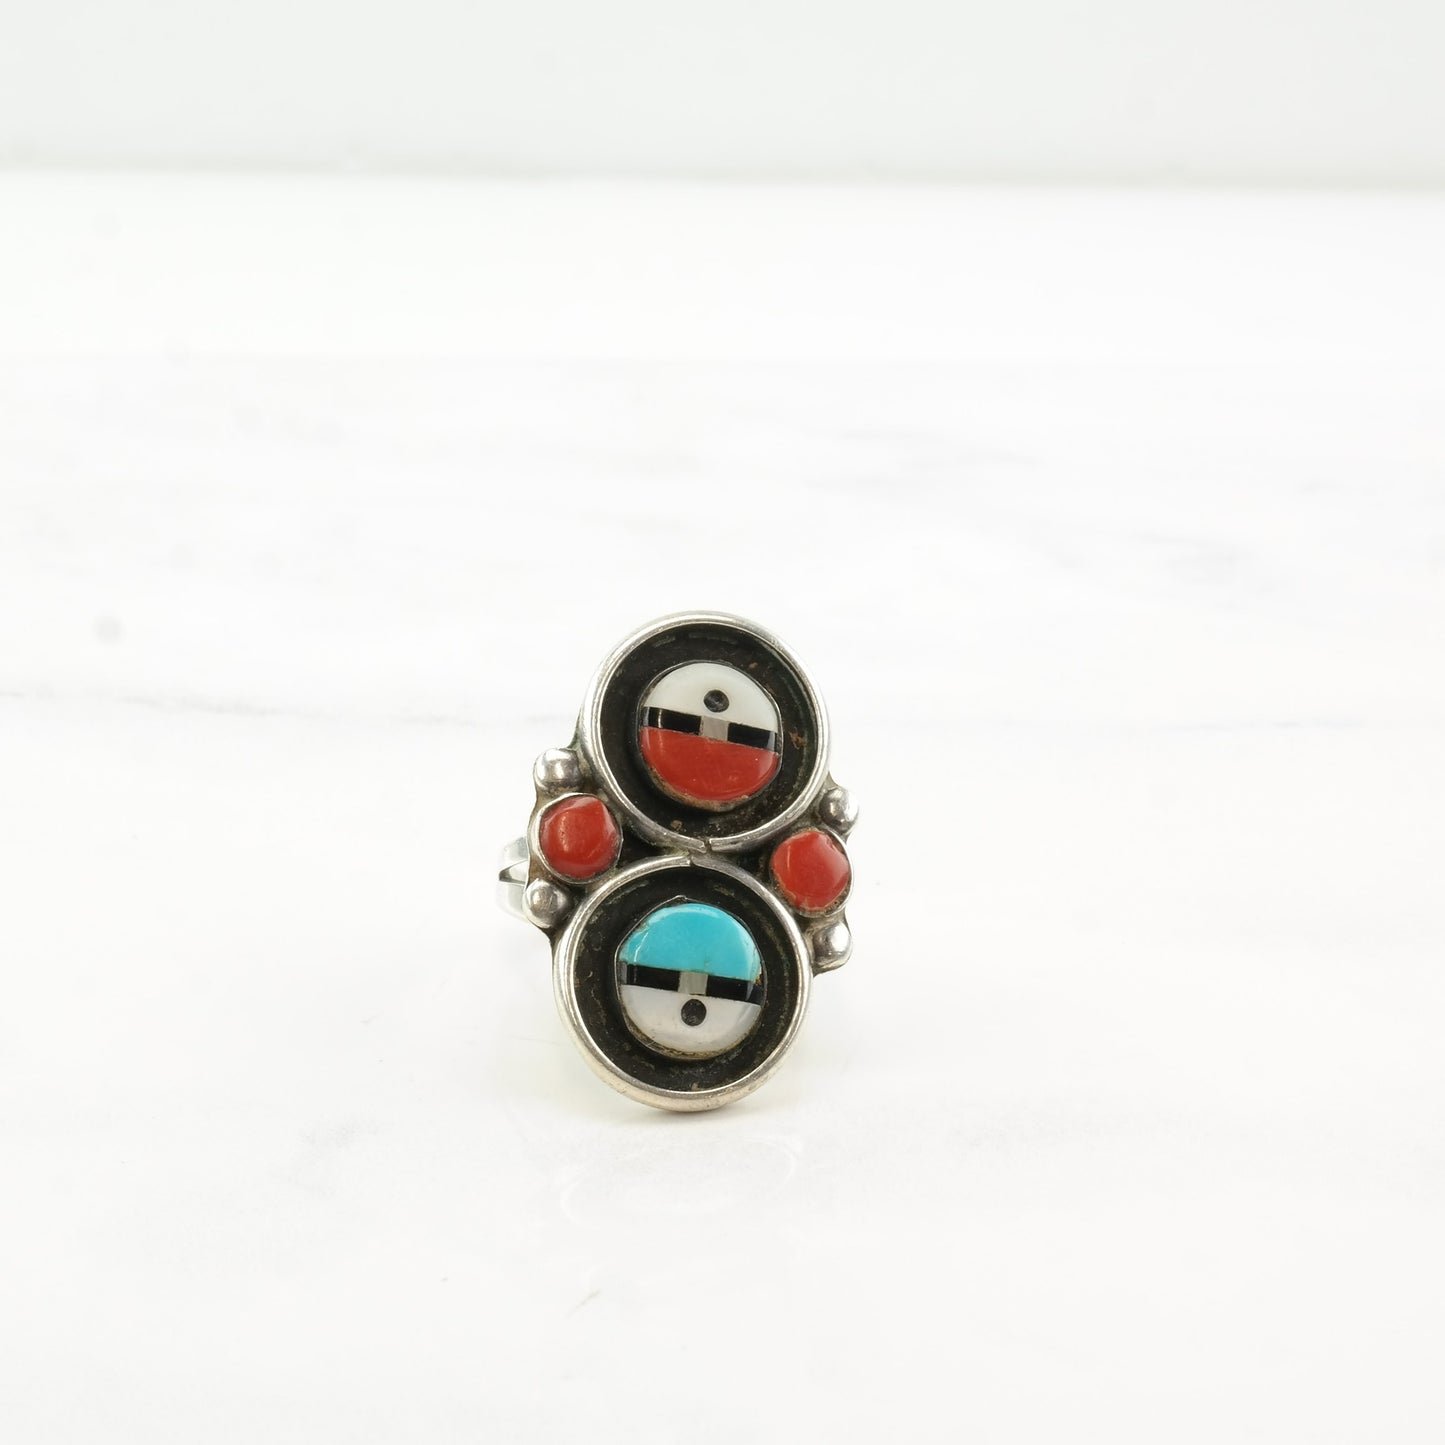 Vintage Native American Silver Ring Coral Turquoise MOP Onyx Two Sun Inlay Sterling Size 6 1/2